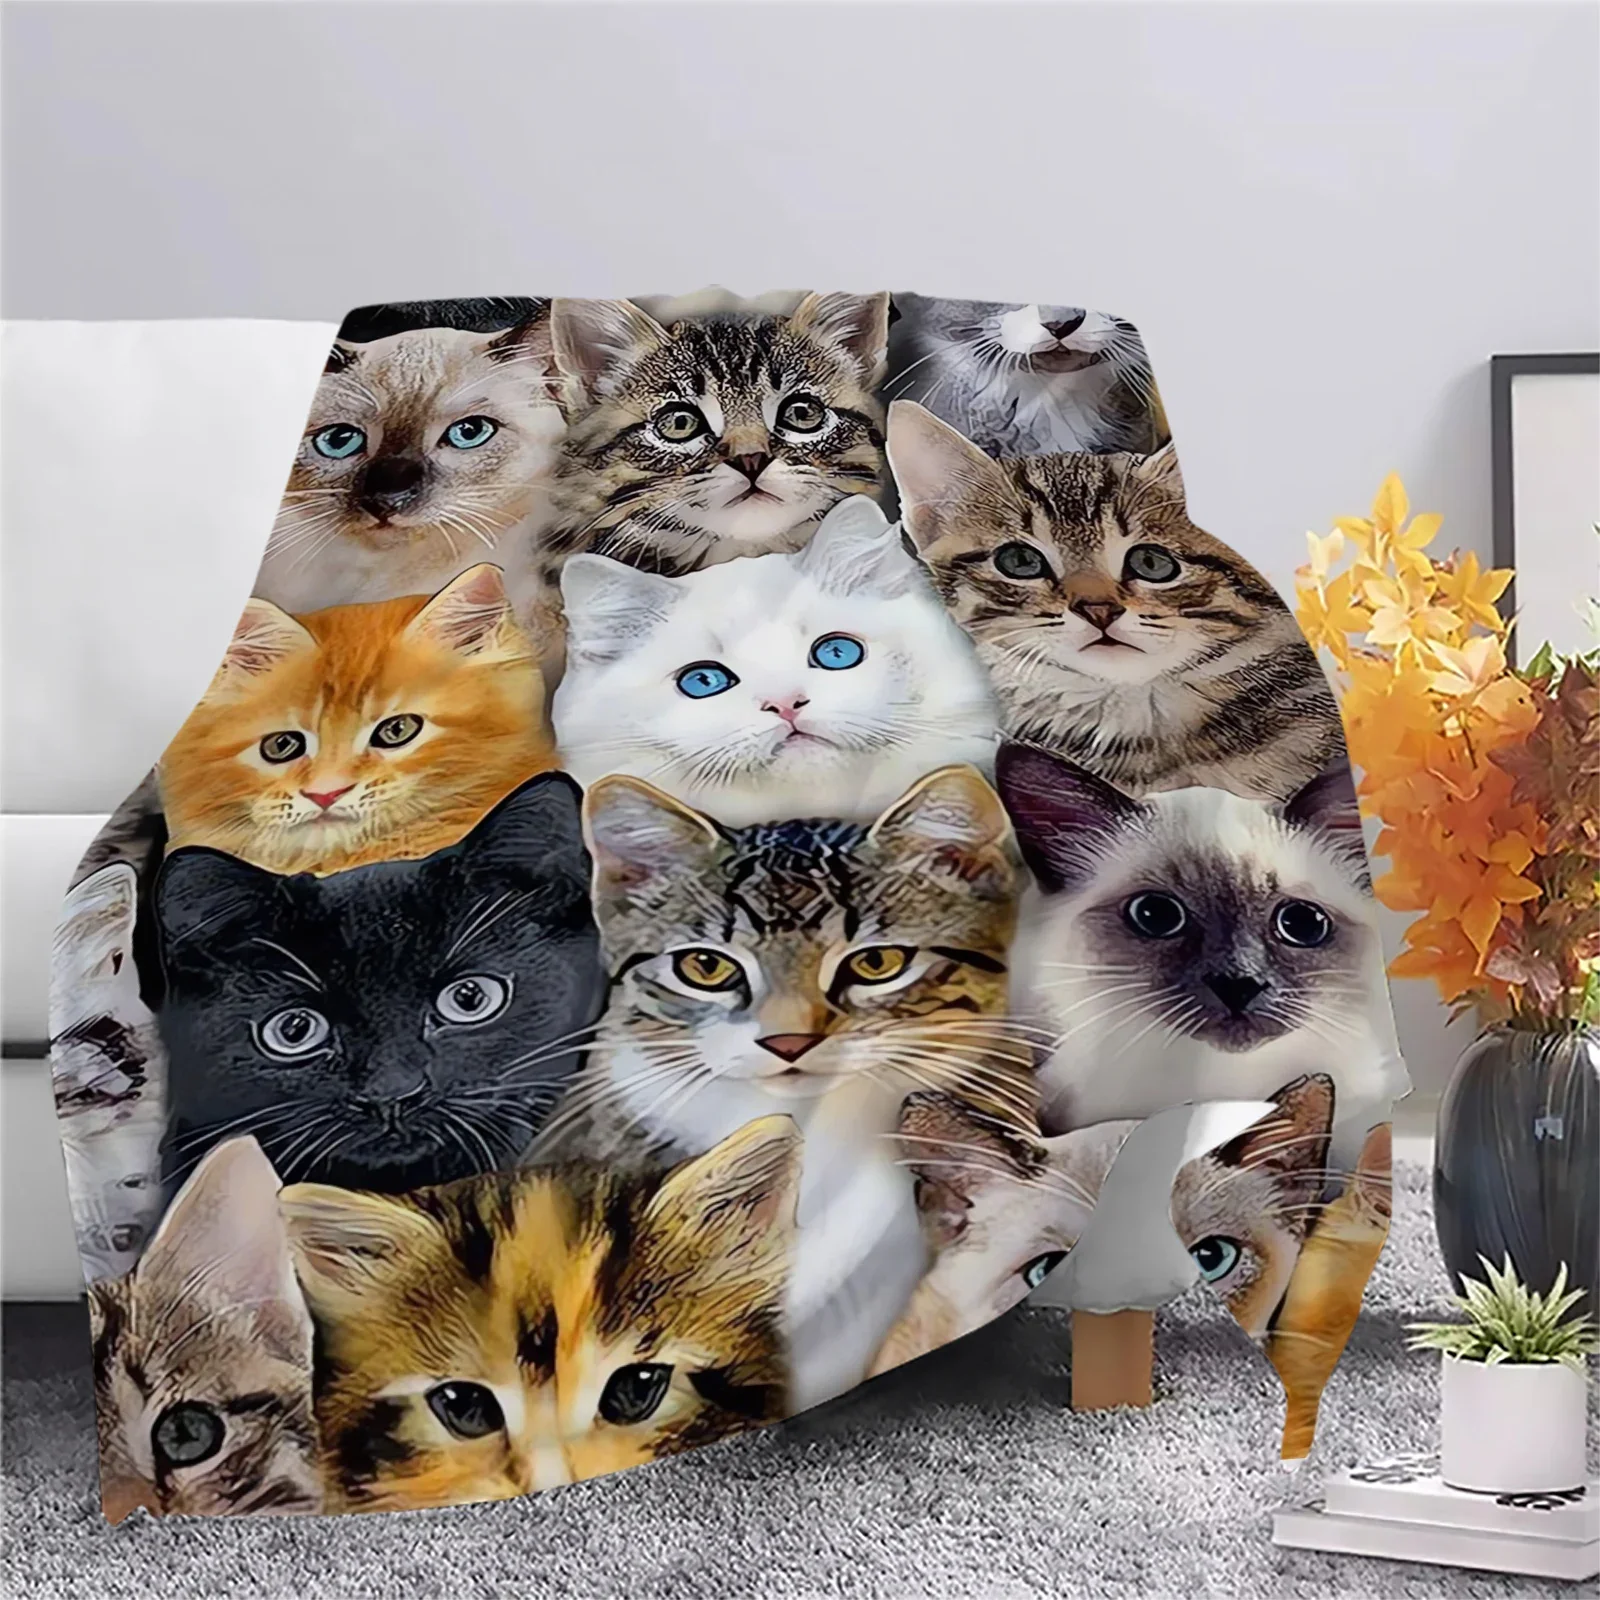 

HX Animals Cats Flannel Blankets Funny Cute Tabby Kitten 3D Printed Throw Blanket Cozy Portable Thin Nap Quilts Dropshipping